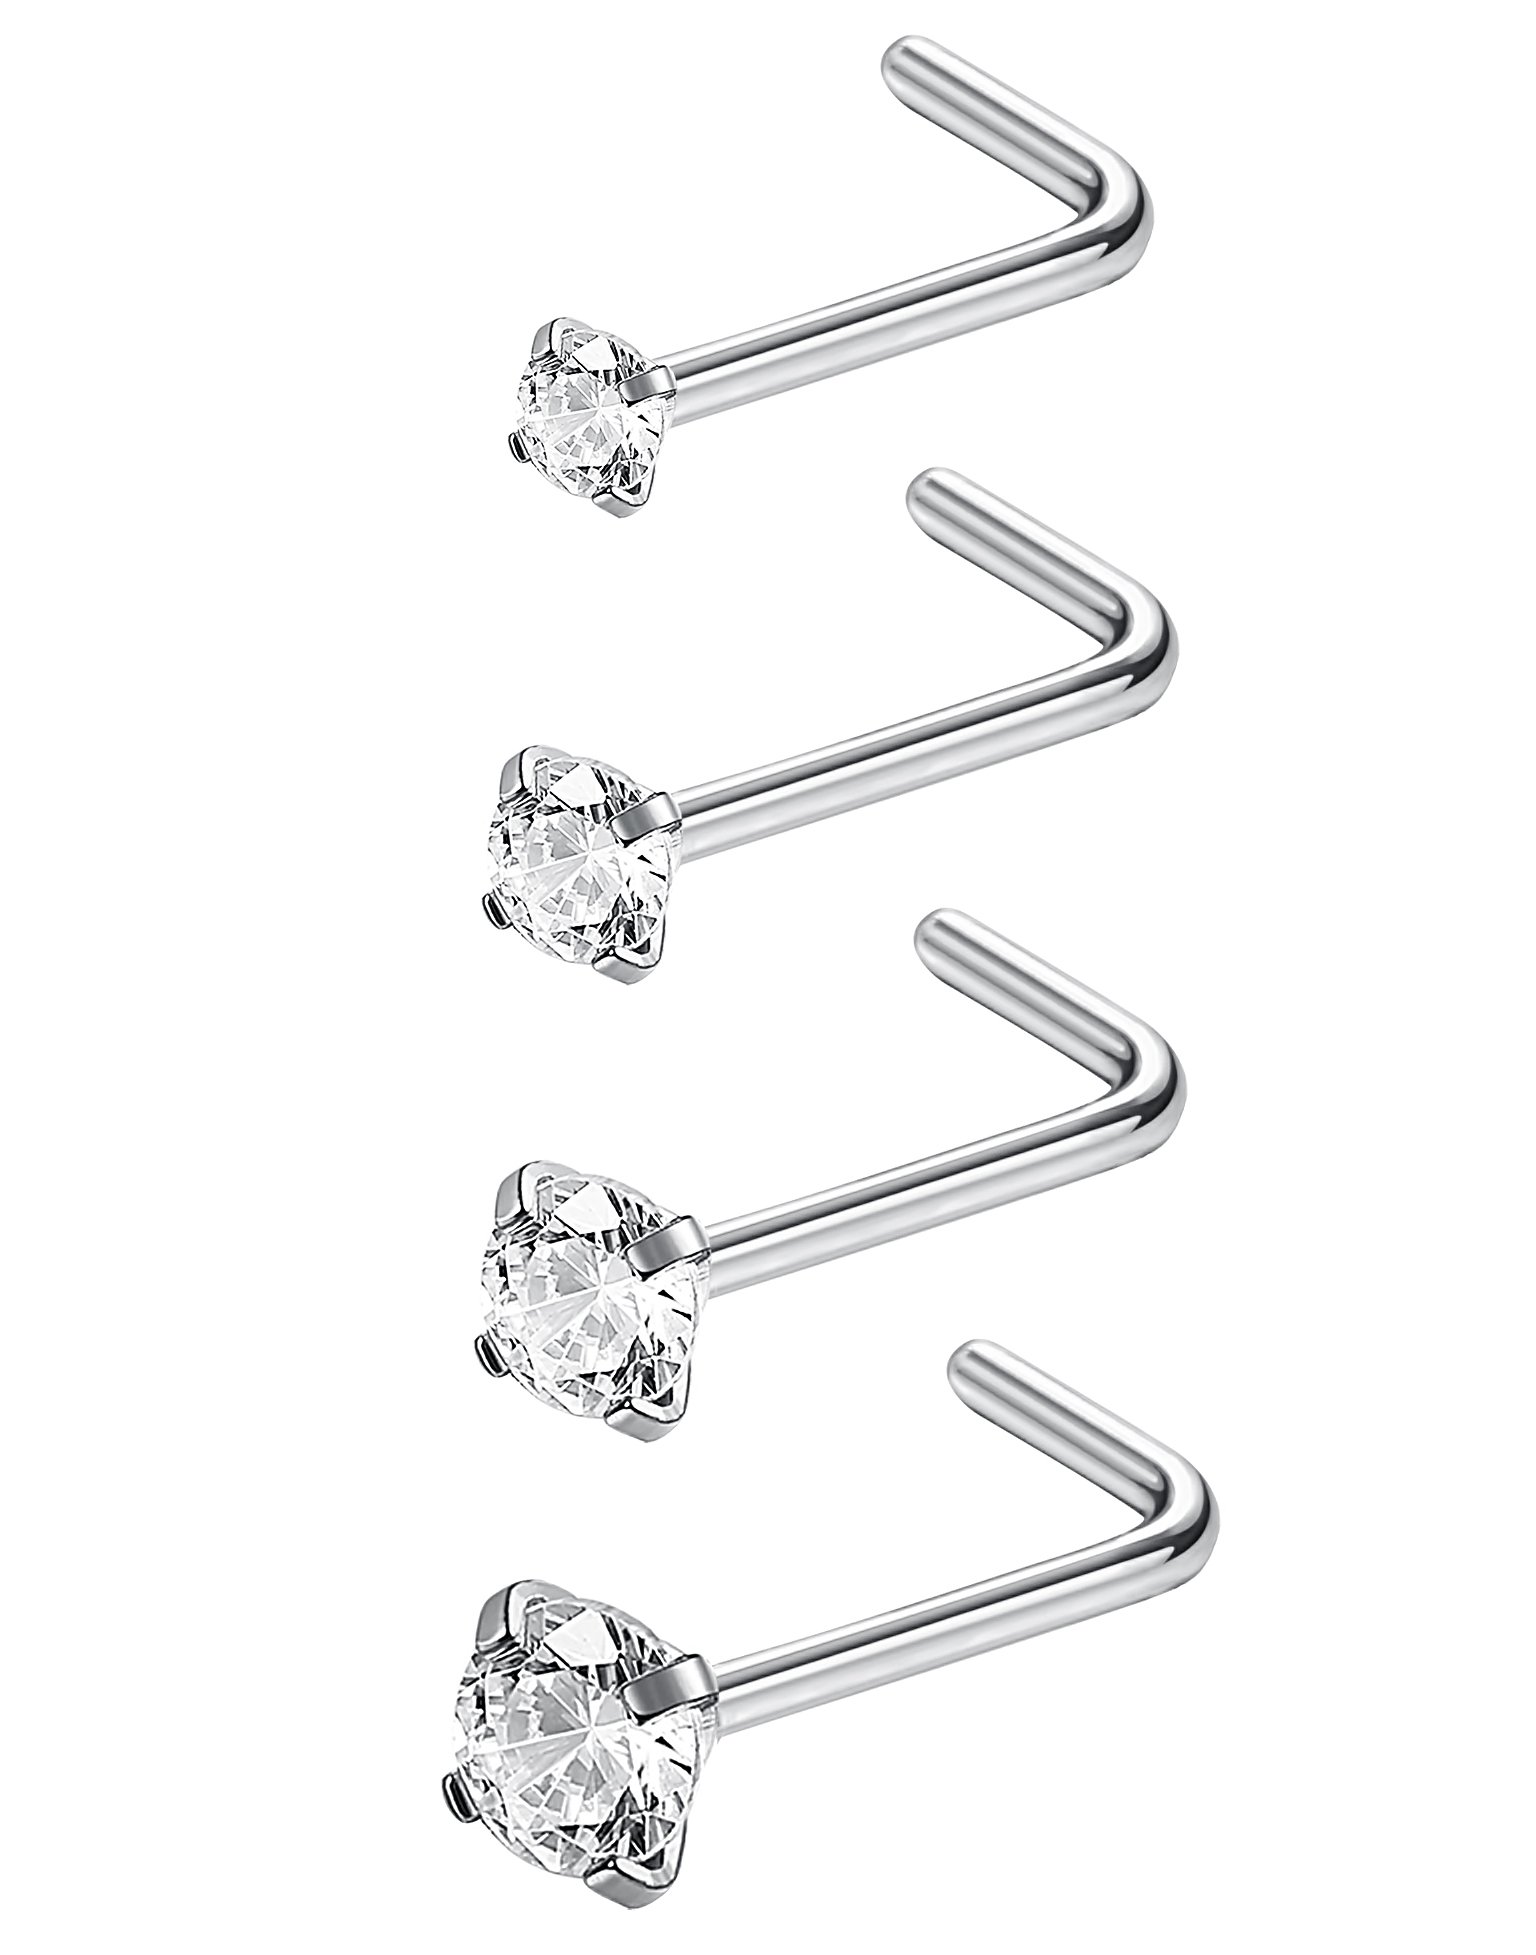 Jstyle 20G 4Pcs Stainless Steel Nose Rings Studs L-Shape Piercing Body Jewelry 1.5mm 2mm 2.5mm 3mm